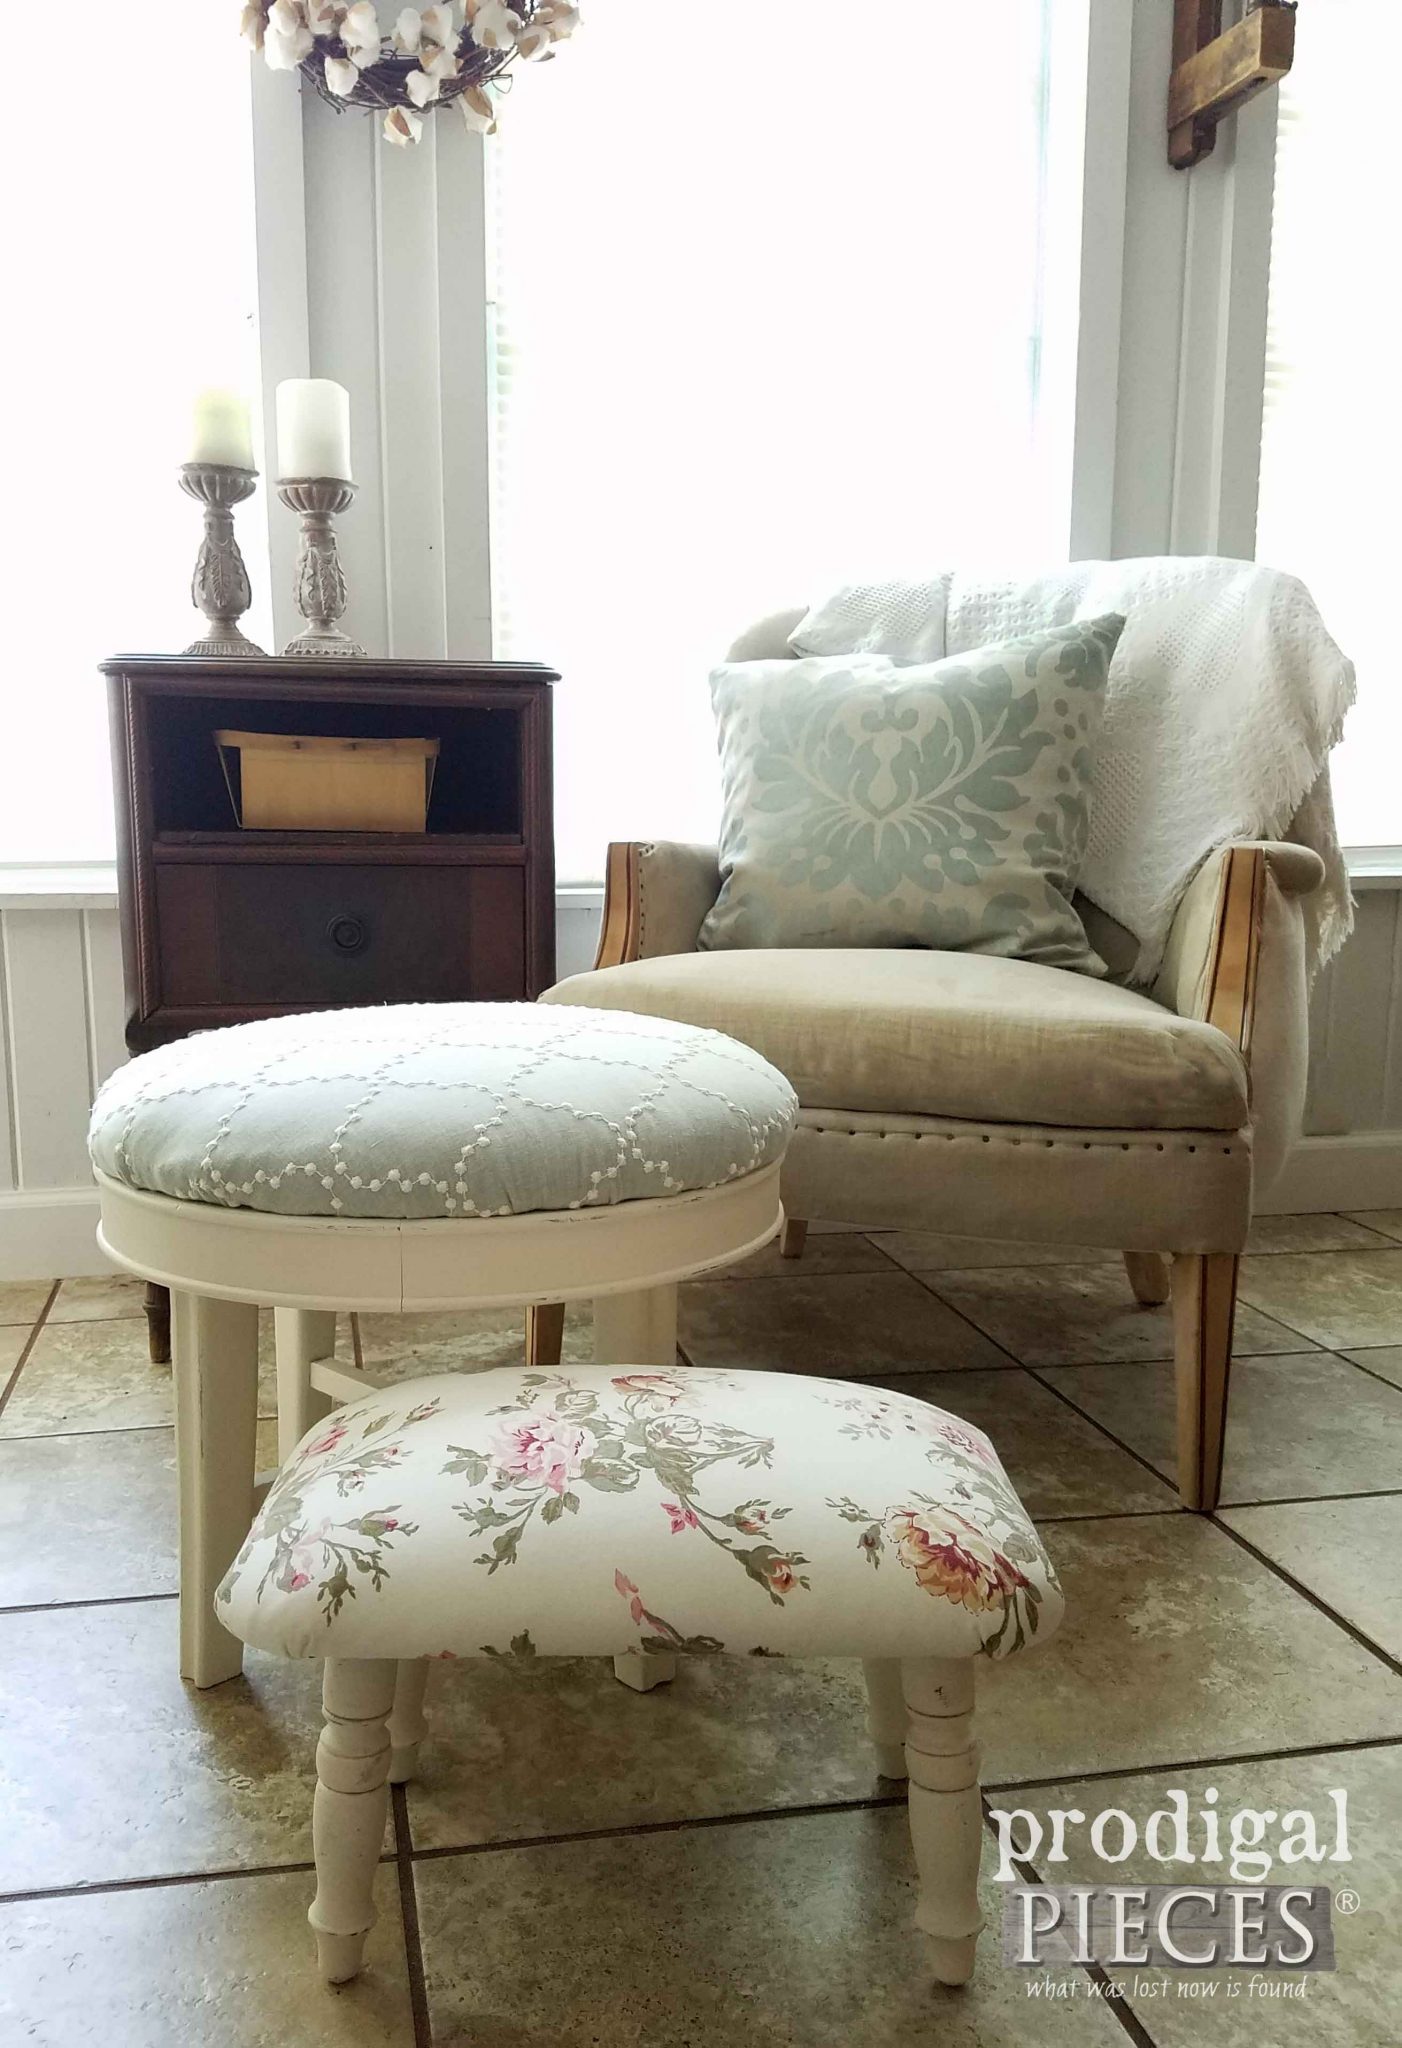 Vintage Footstool Upholstery with DIY tutorial by Prodigal Pieces | prodigalpieces.com